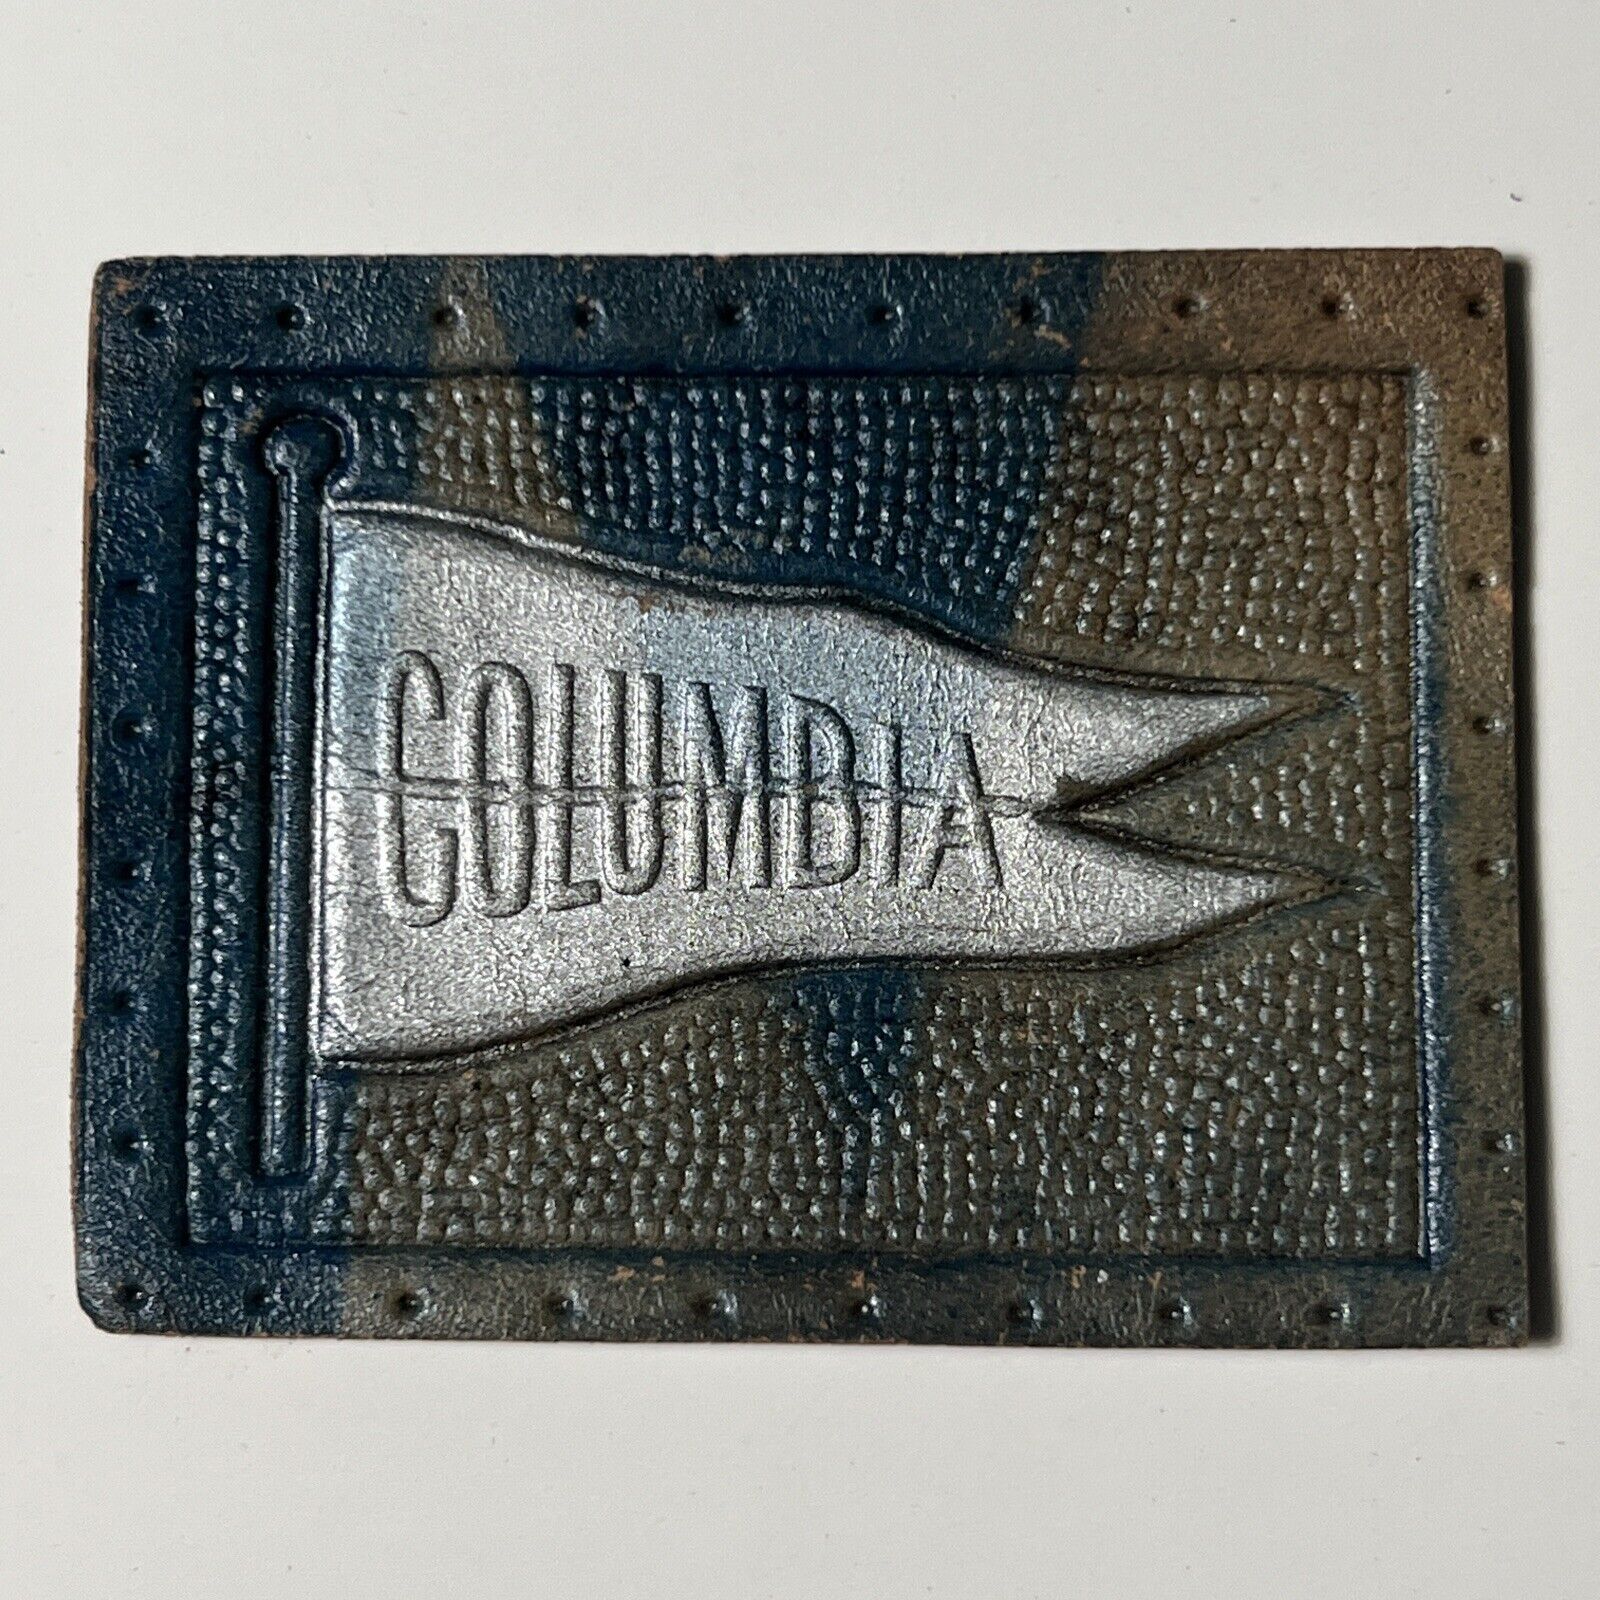 Vintage 1910 COLUMBIA UNIVERSITY Tobacco Leather Patch PENNANT FLAG New York